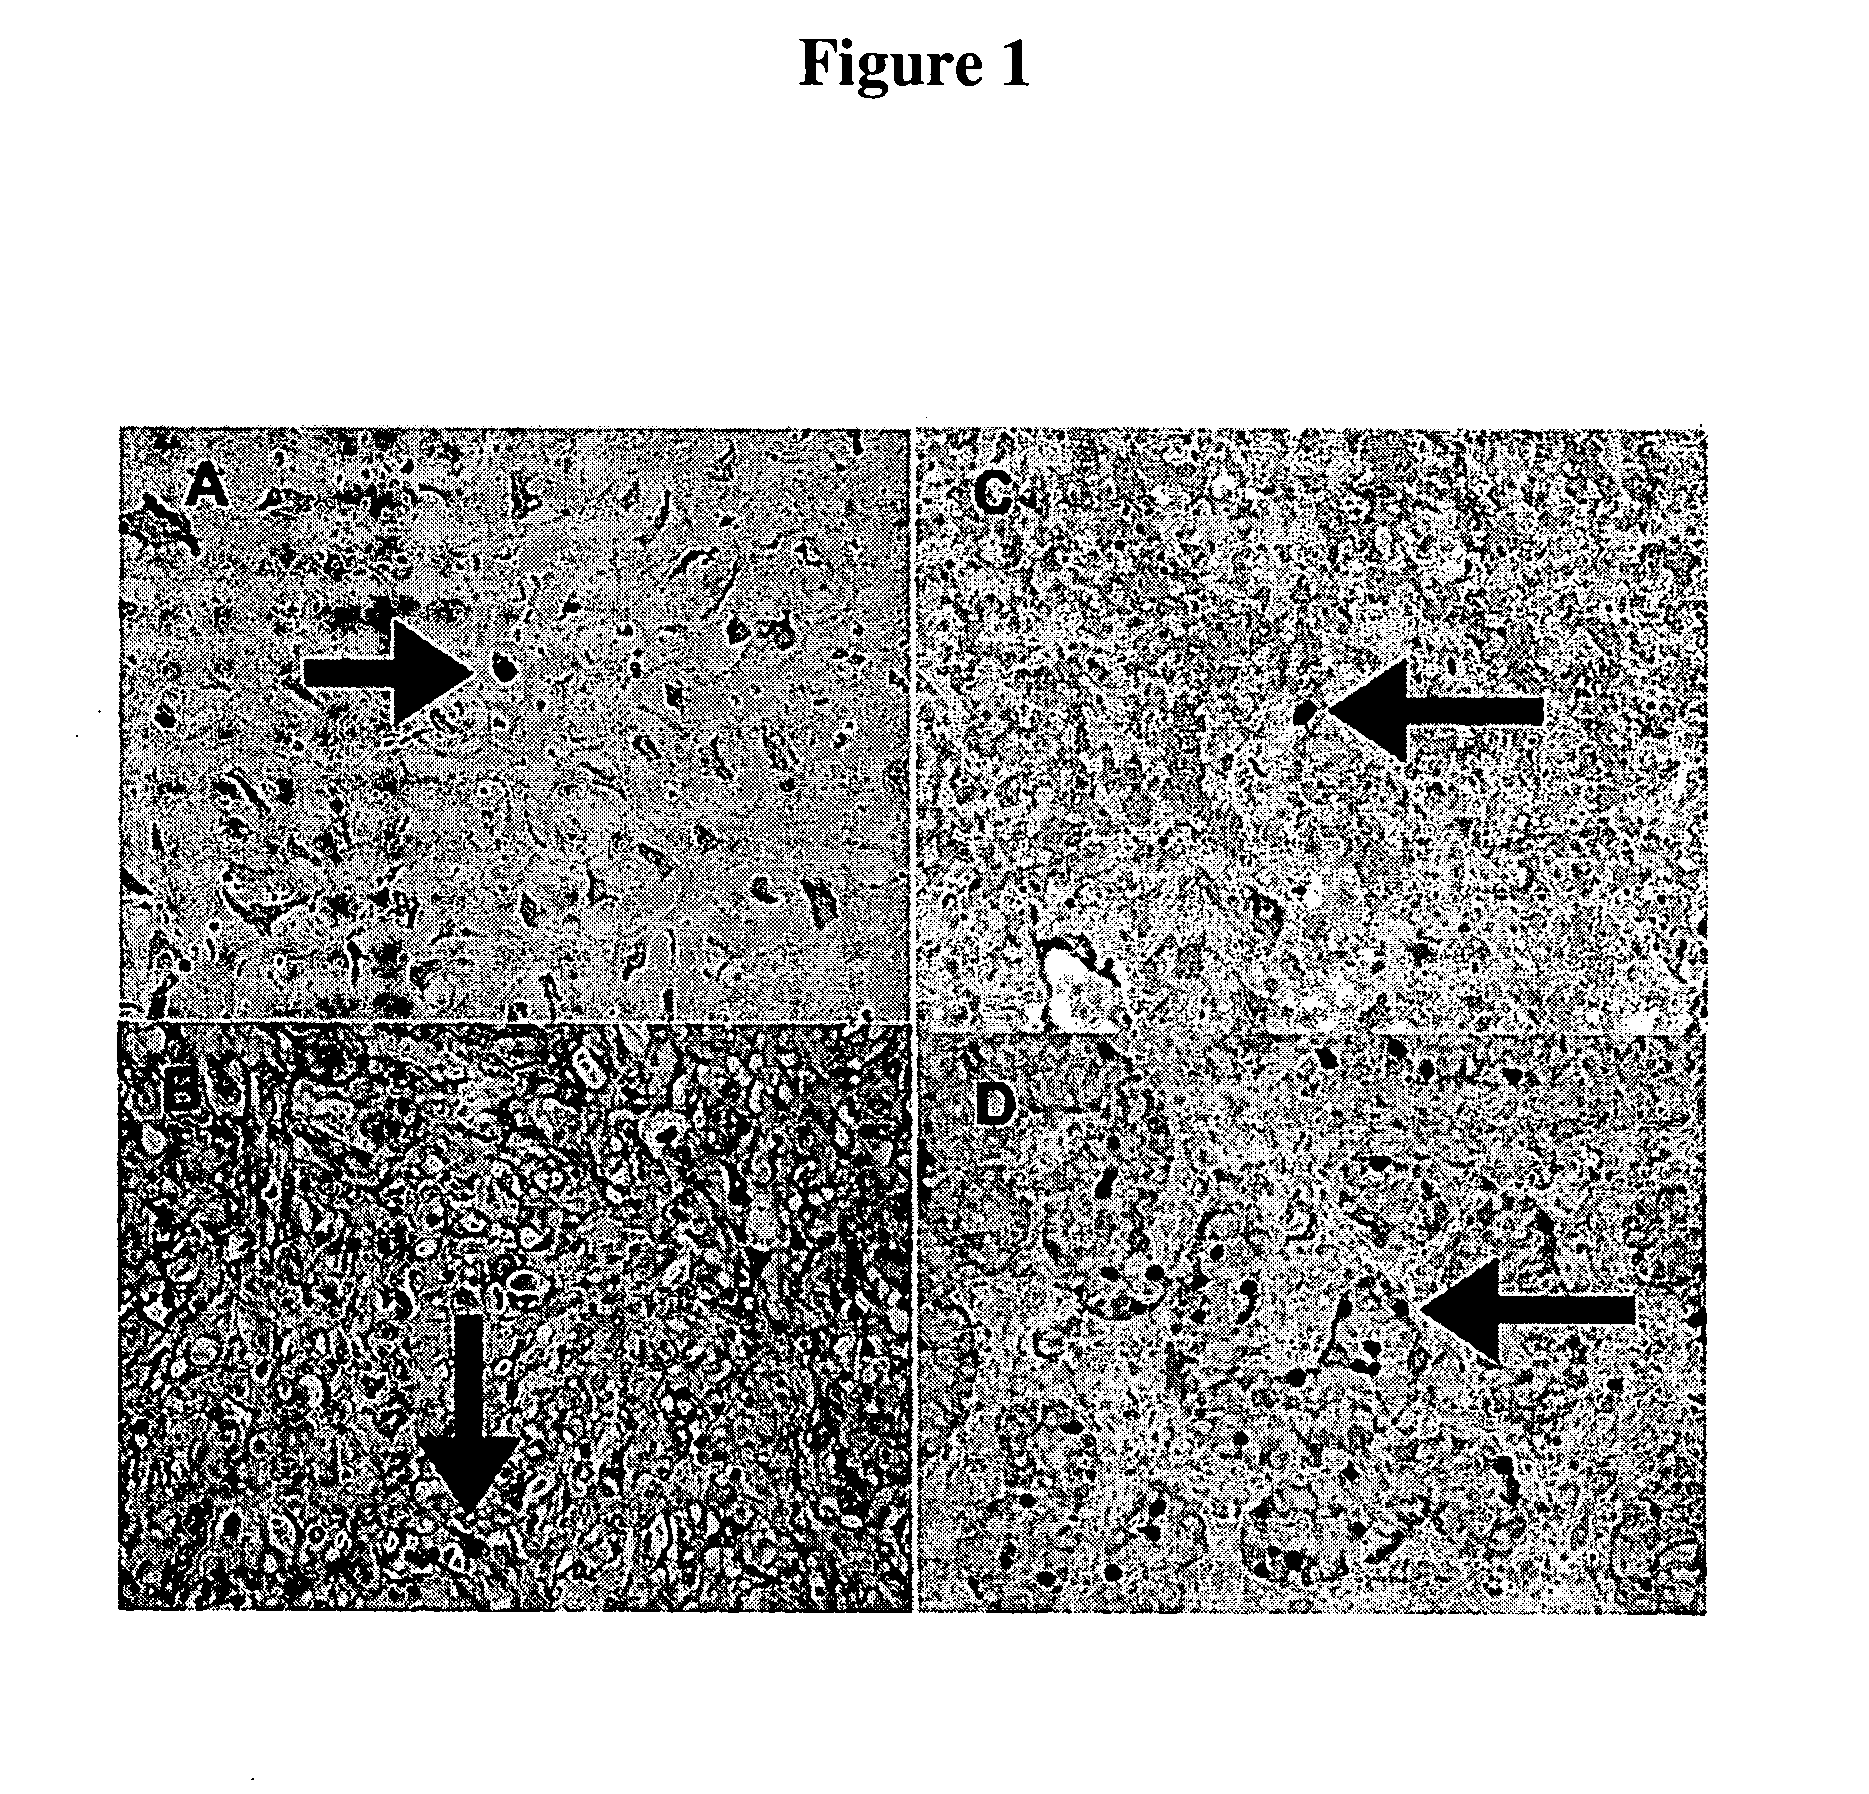 Compositions enriched in neoplastic stem cells and methods comprising same